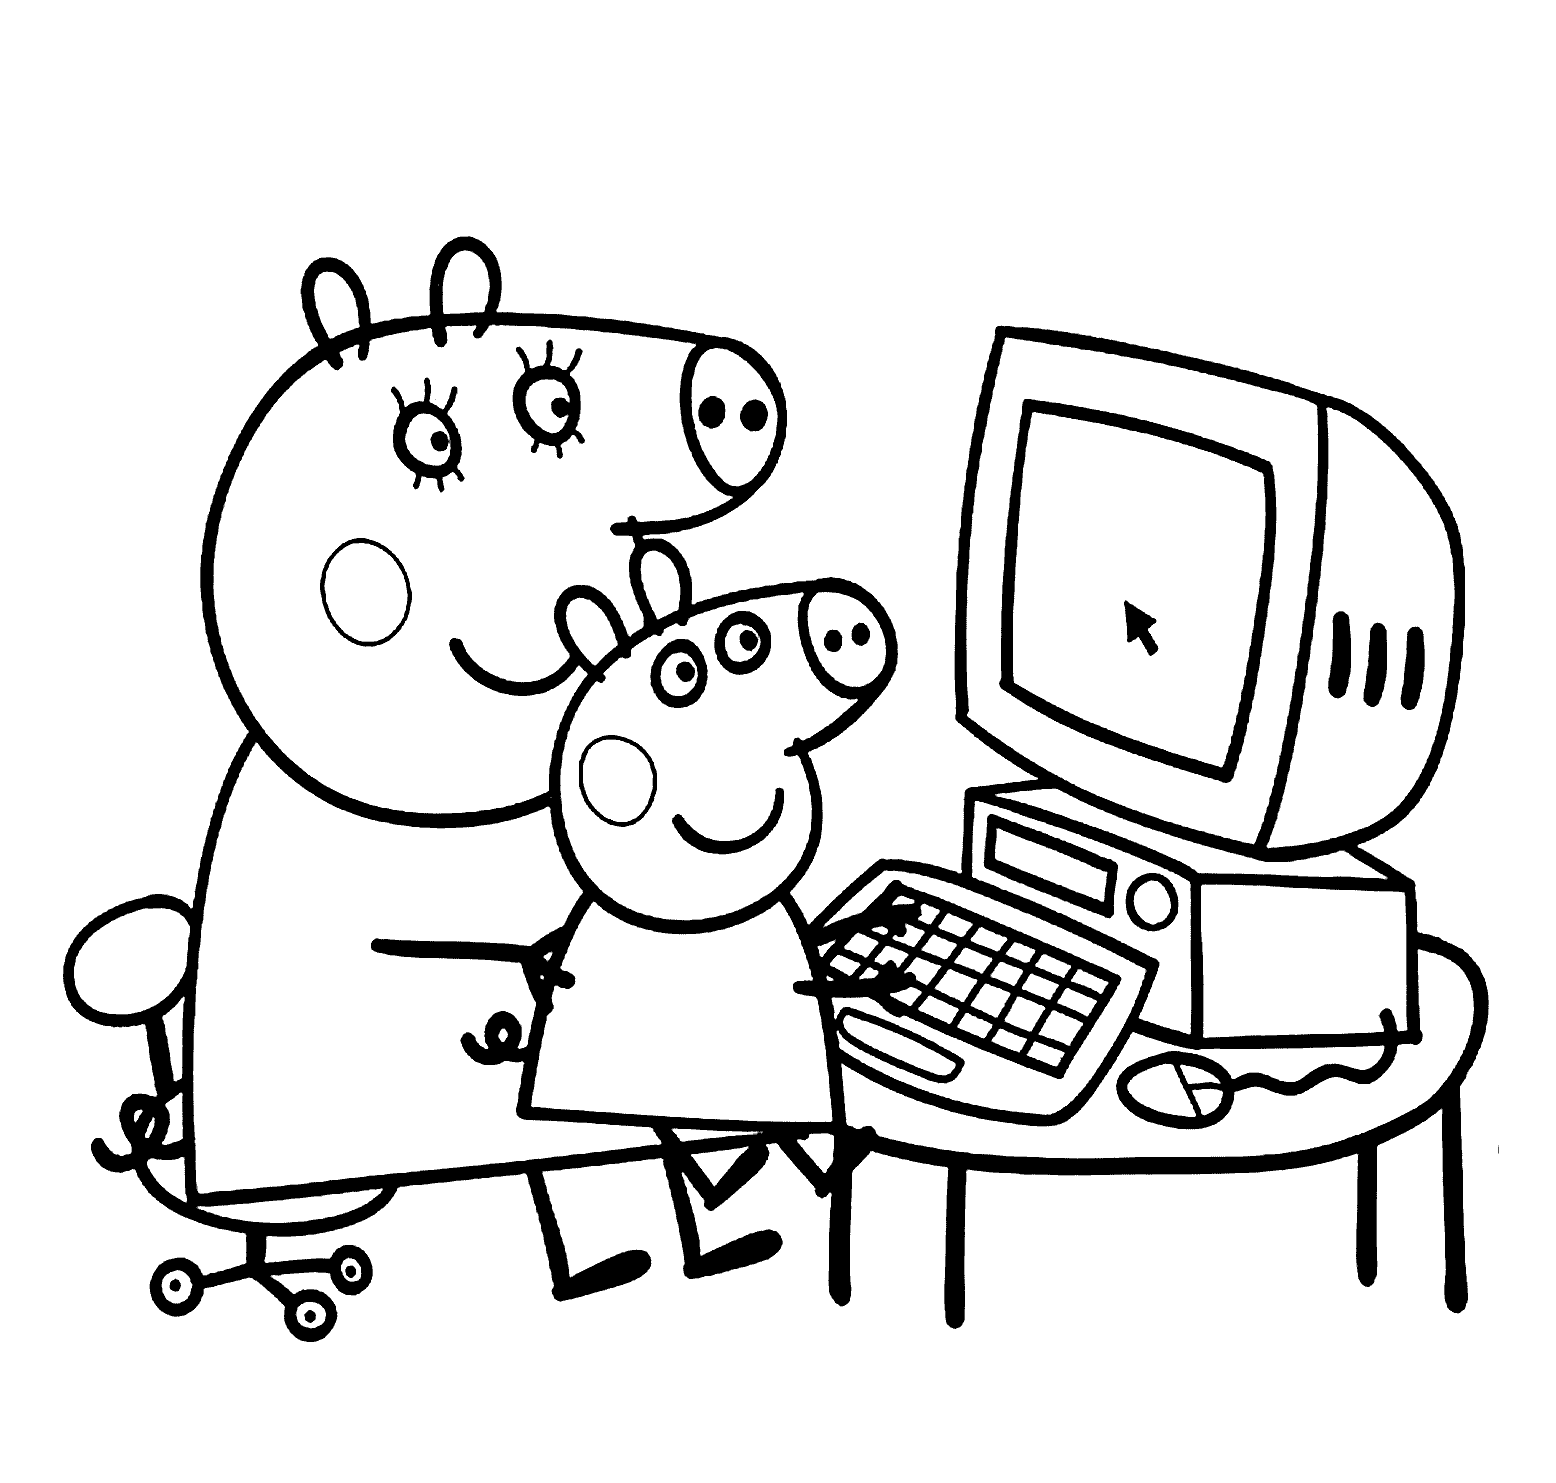 Peppa on Computer Coloring Page